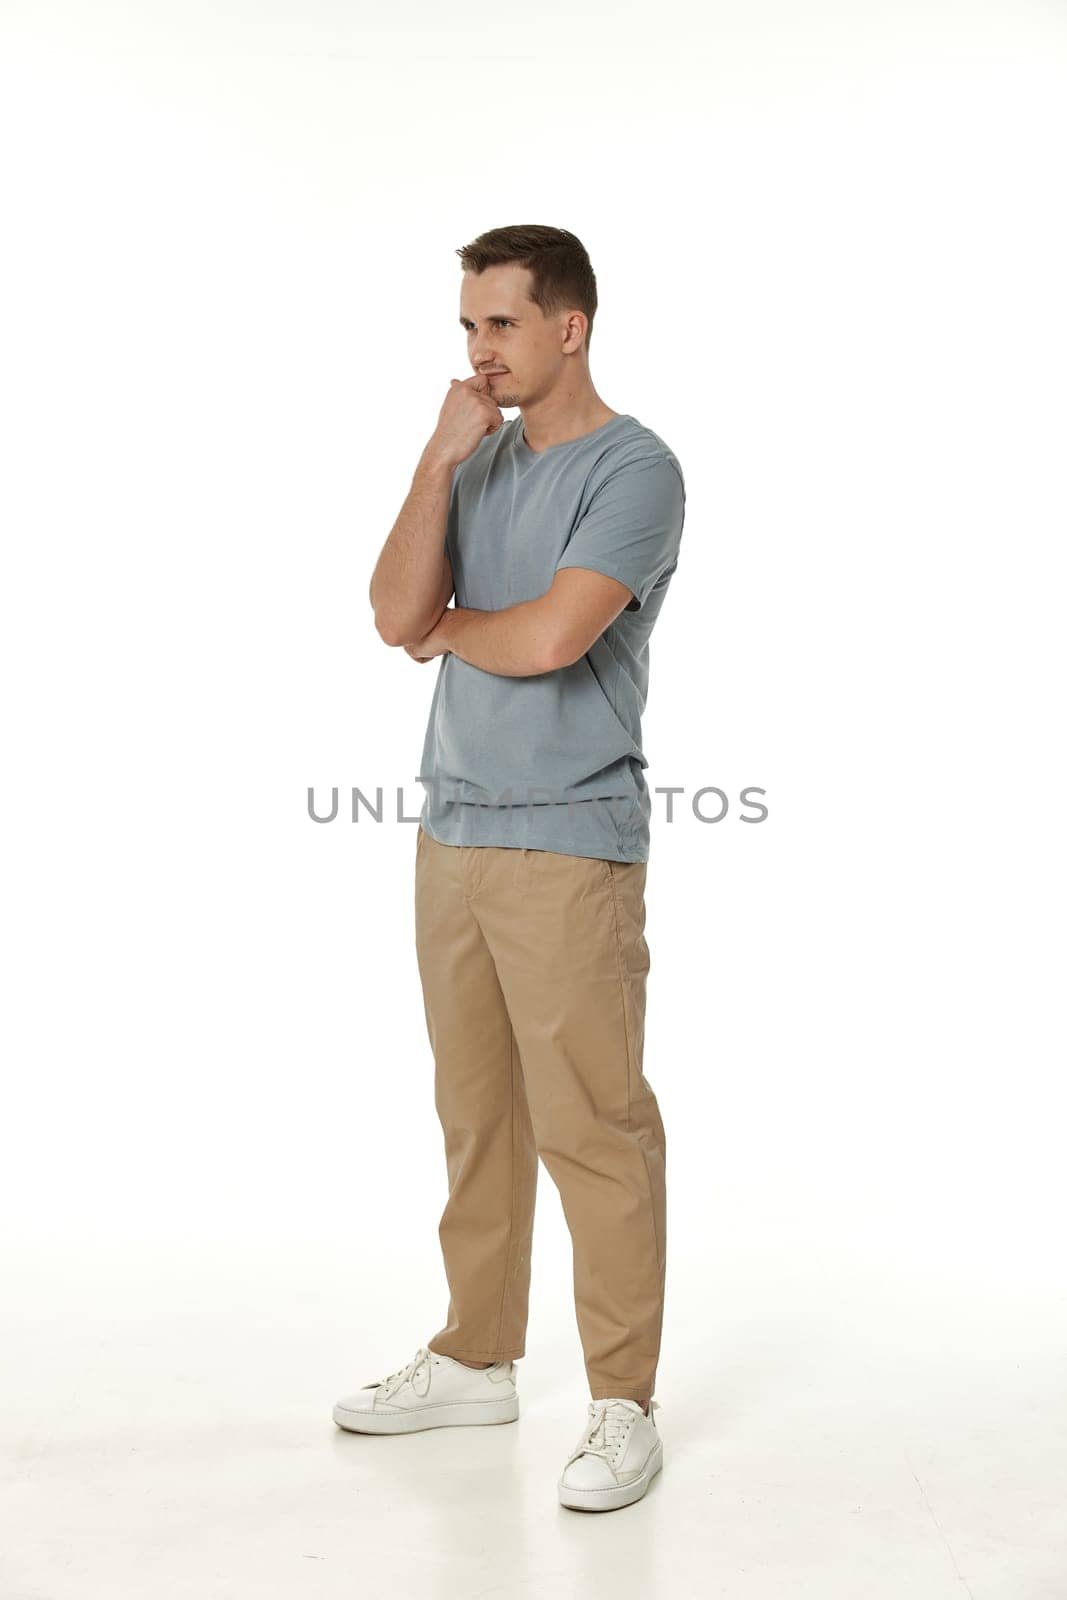 frustrated young man on white background. sadness by erstudio